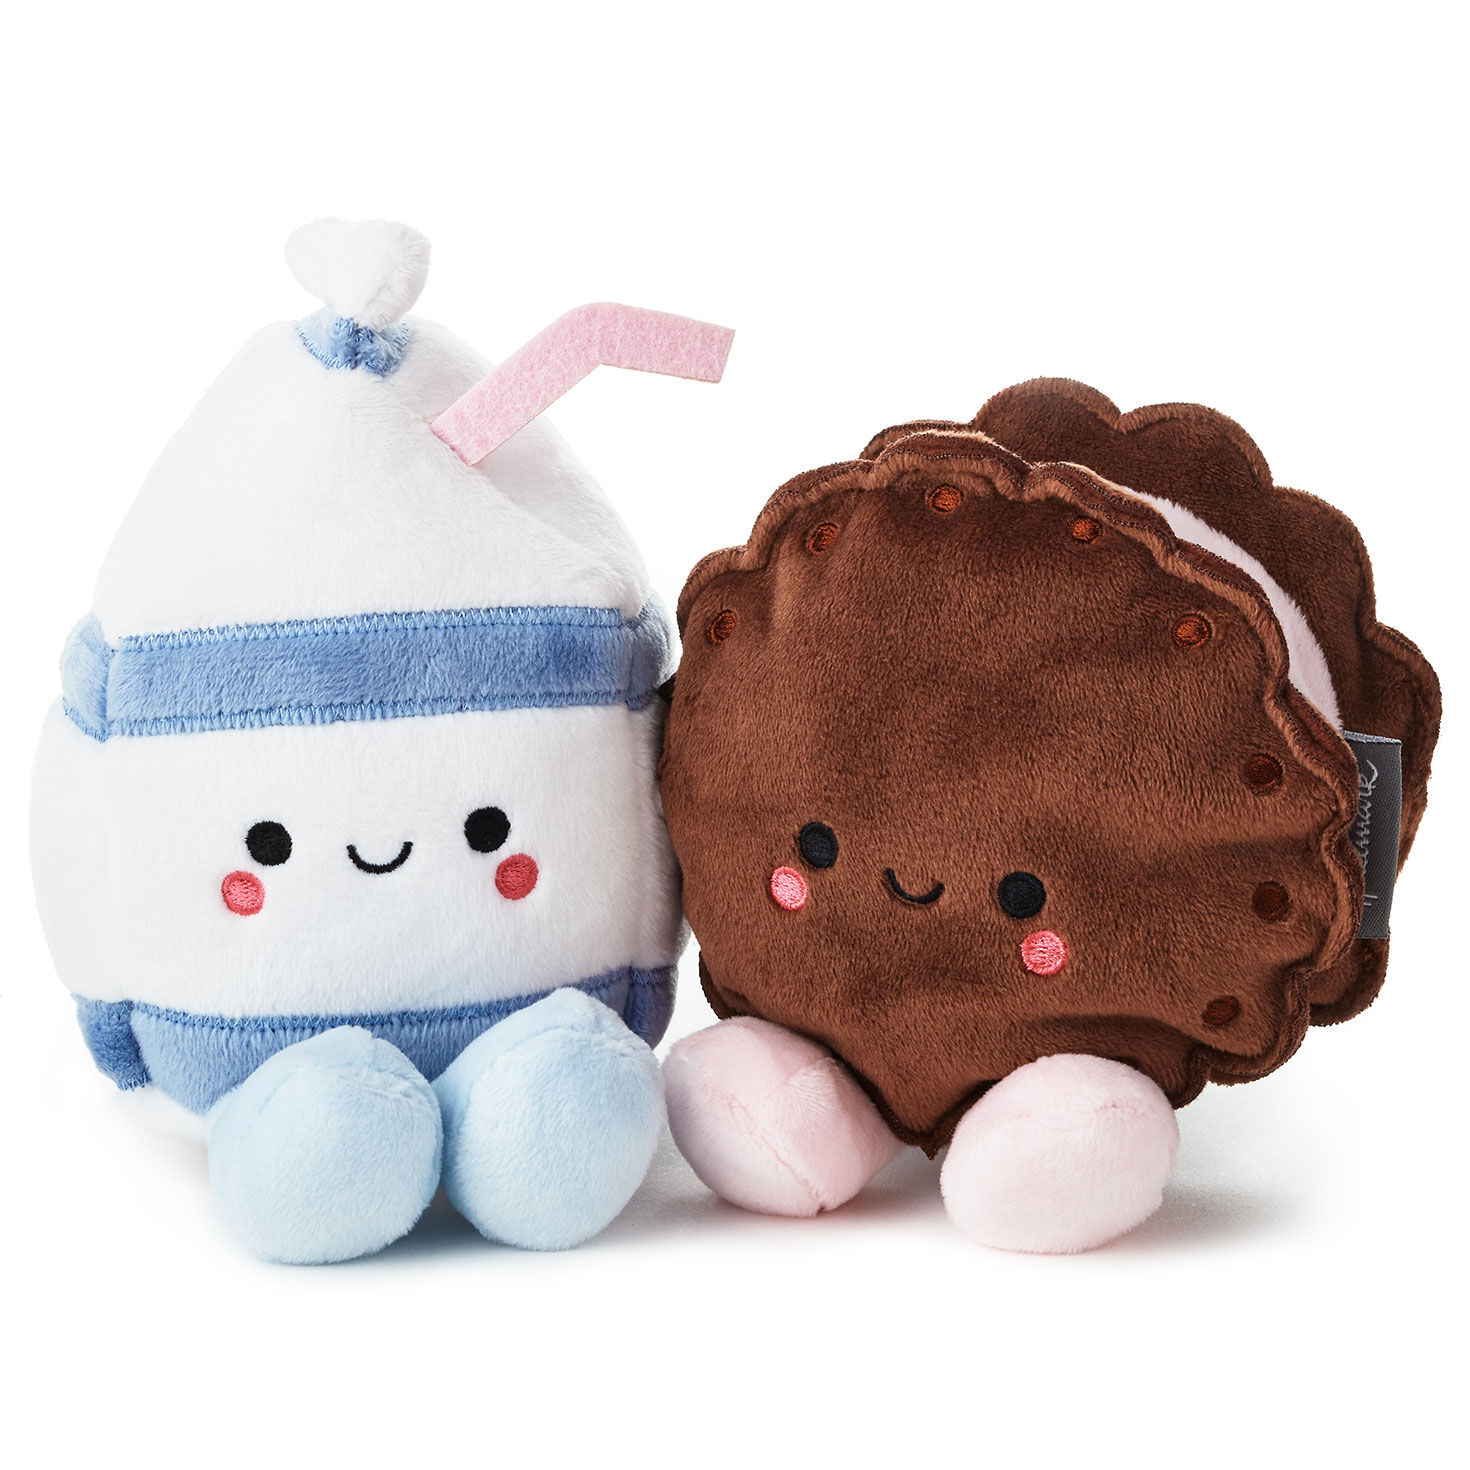 Better Together Milk and Cookie Magnetic Plush, 6" for only USD 16.99 | Hallmark